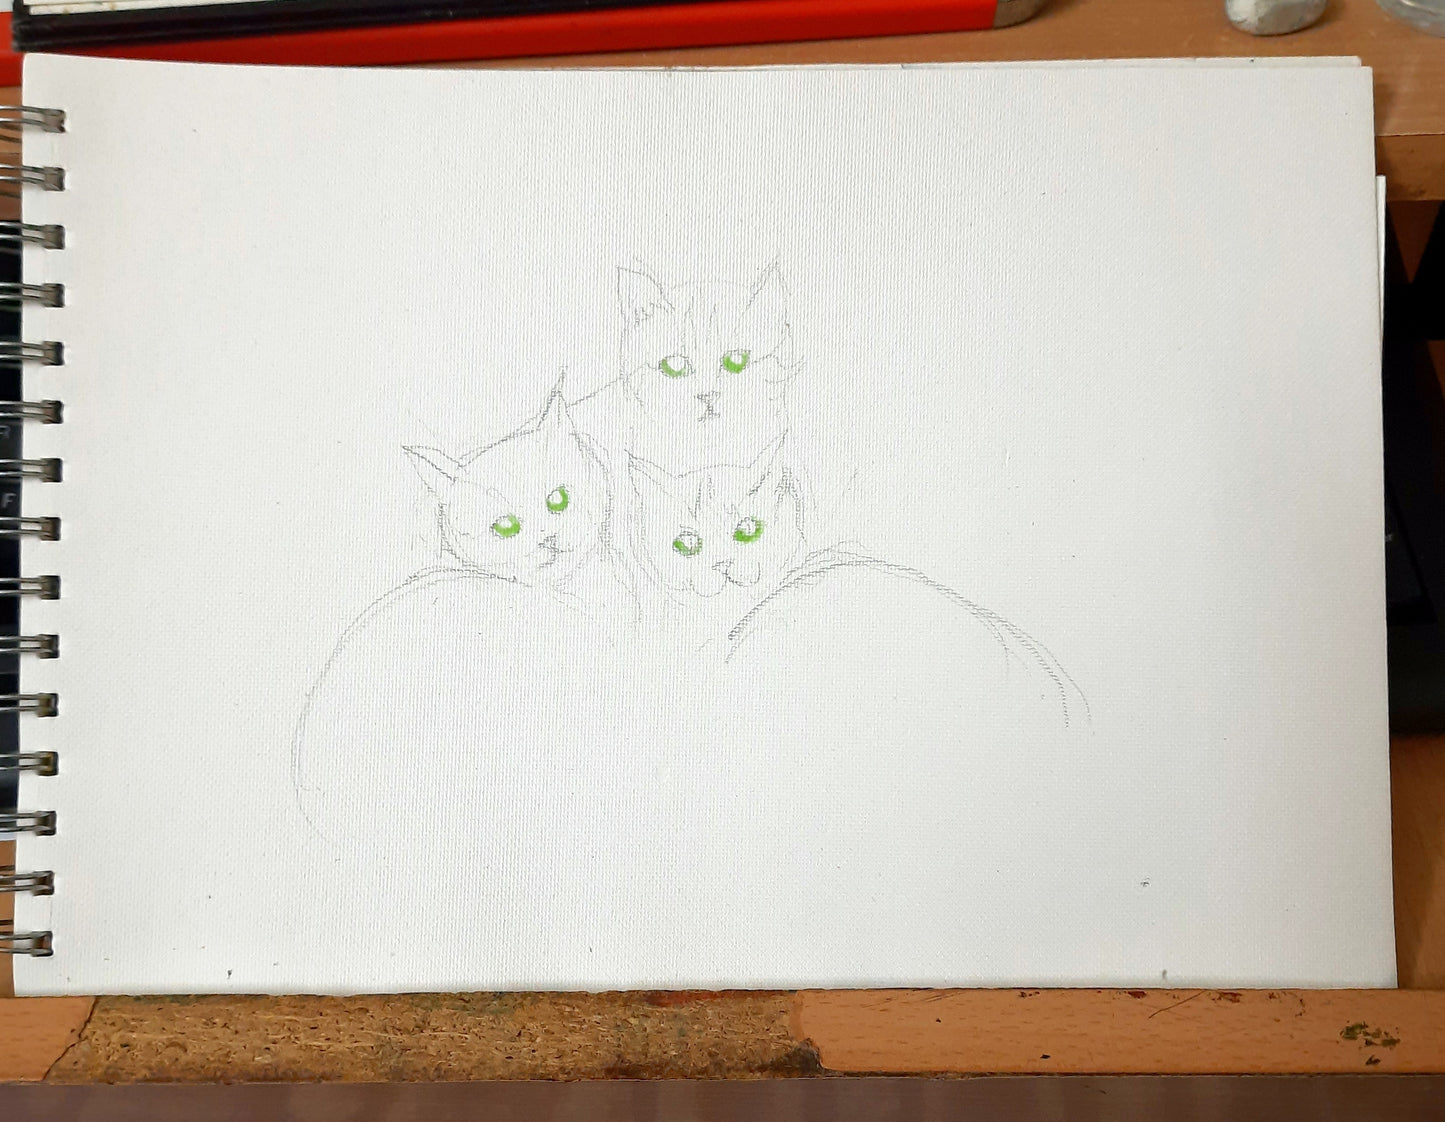 Three Little Kittens, watercolor painting on paper